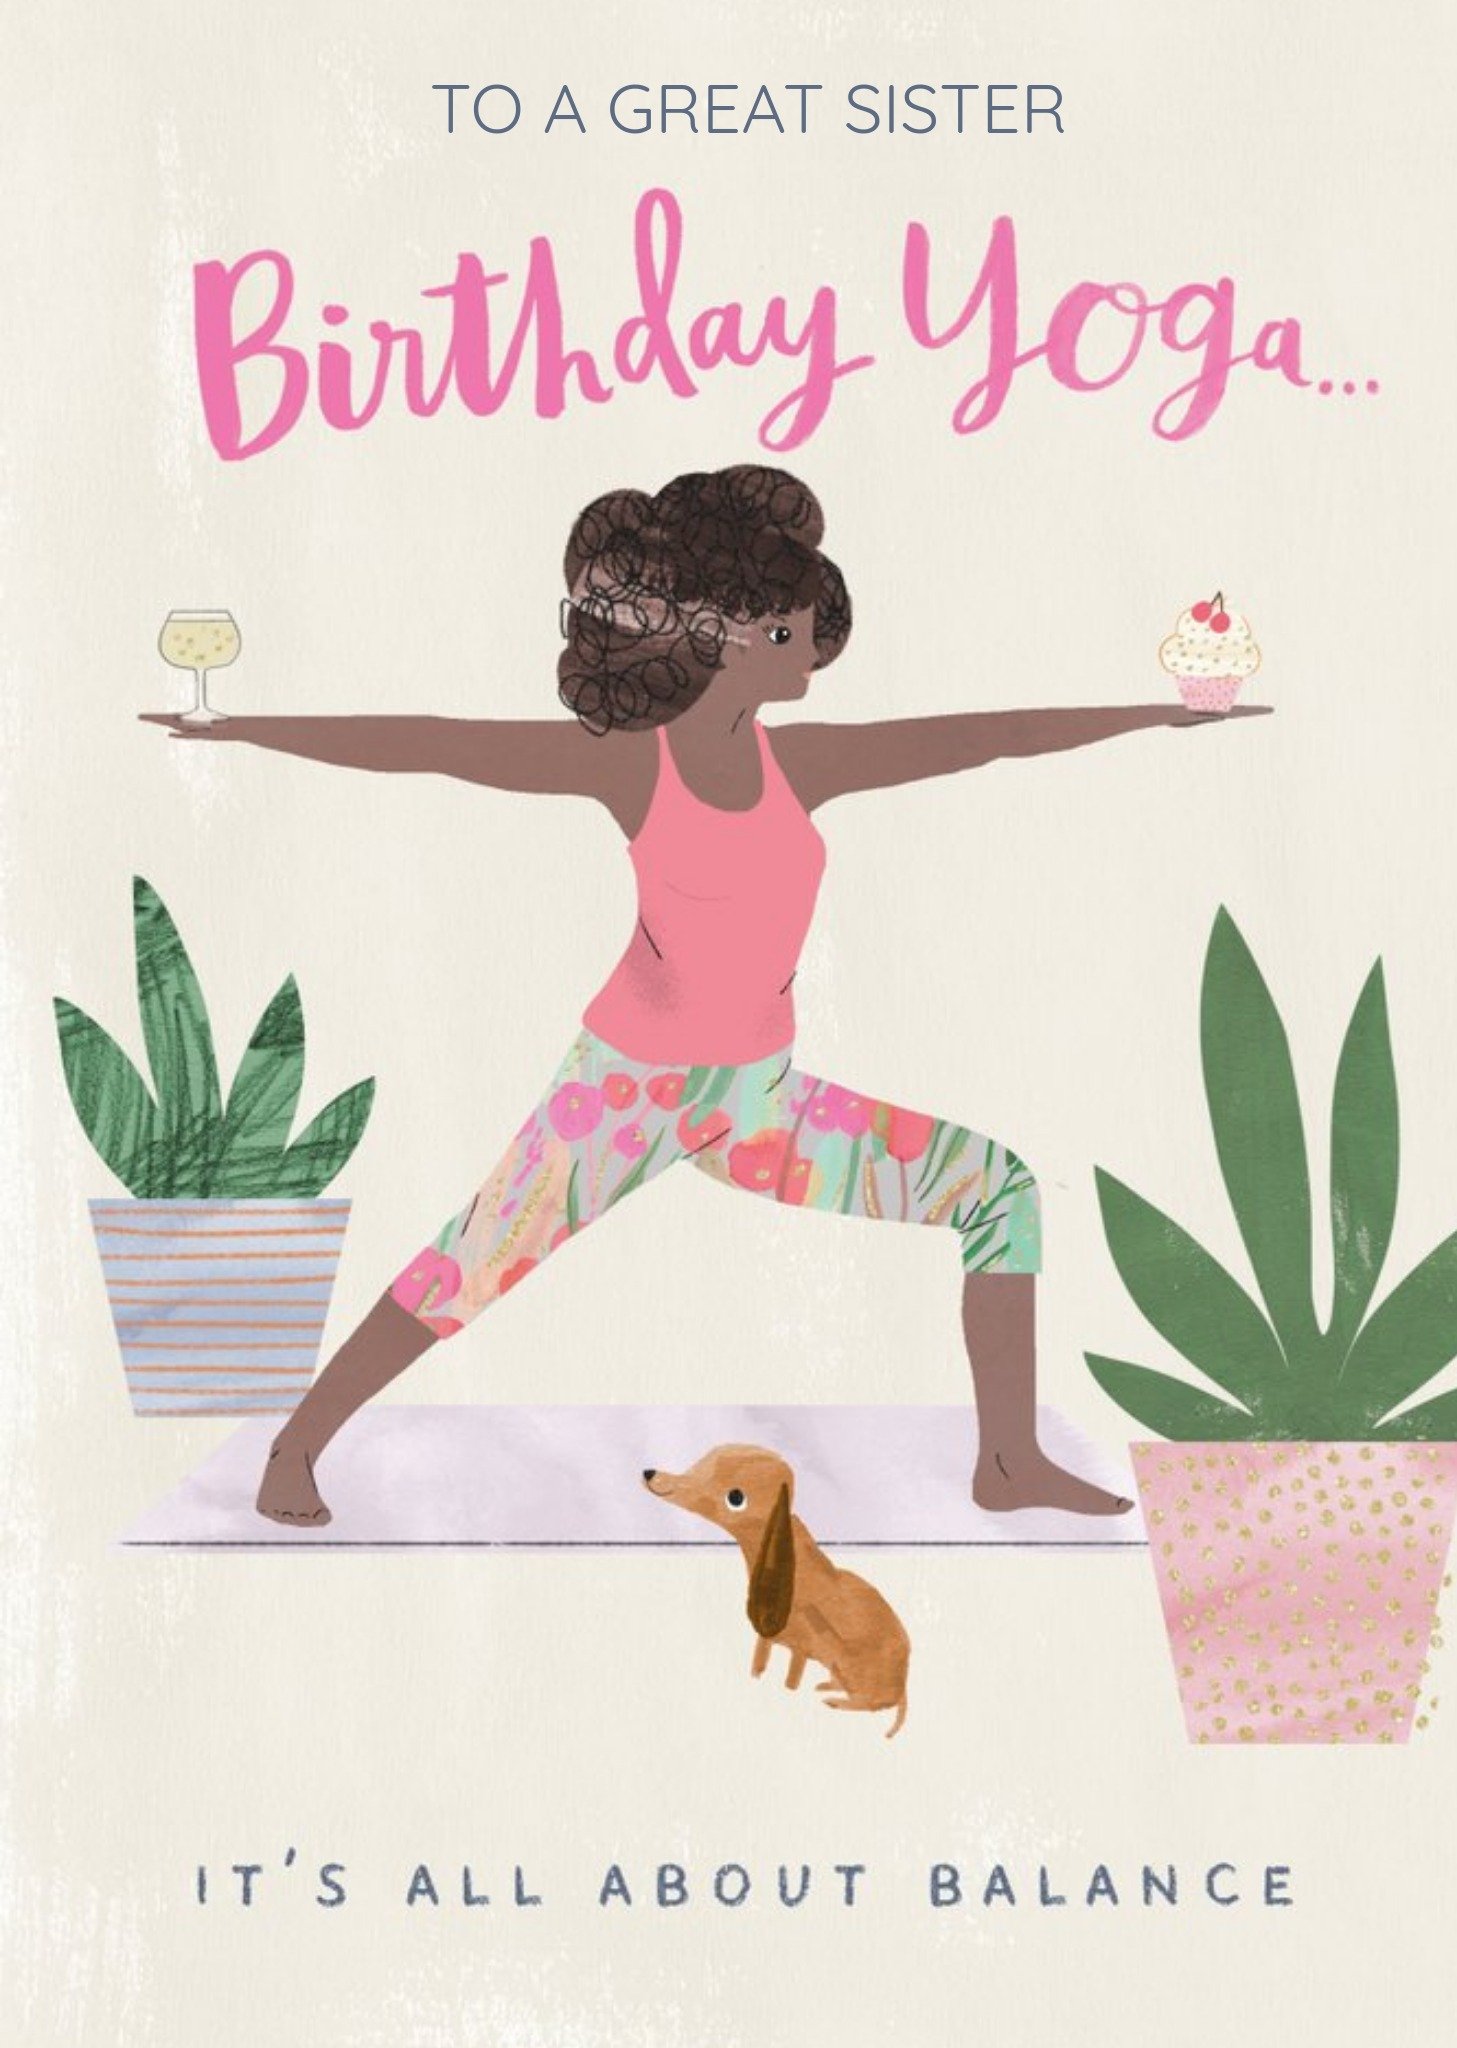 Moonpig Pigment Hey Girl Character To A Great Sister It's All About The Balance Birthday Yoga Card E